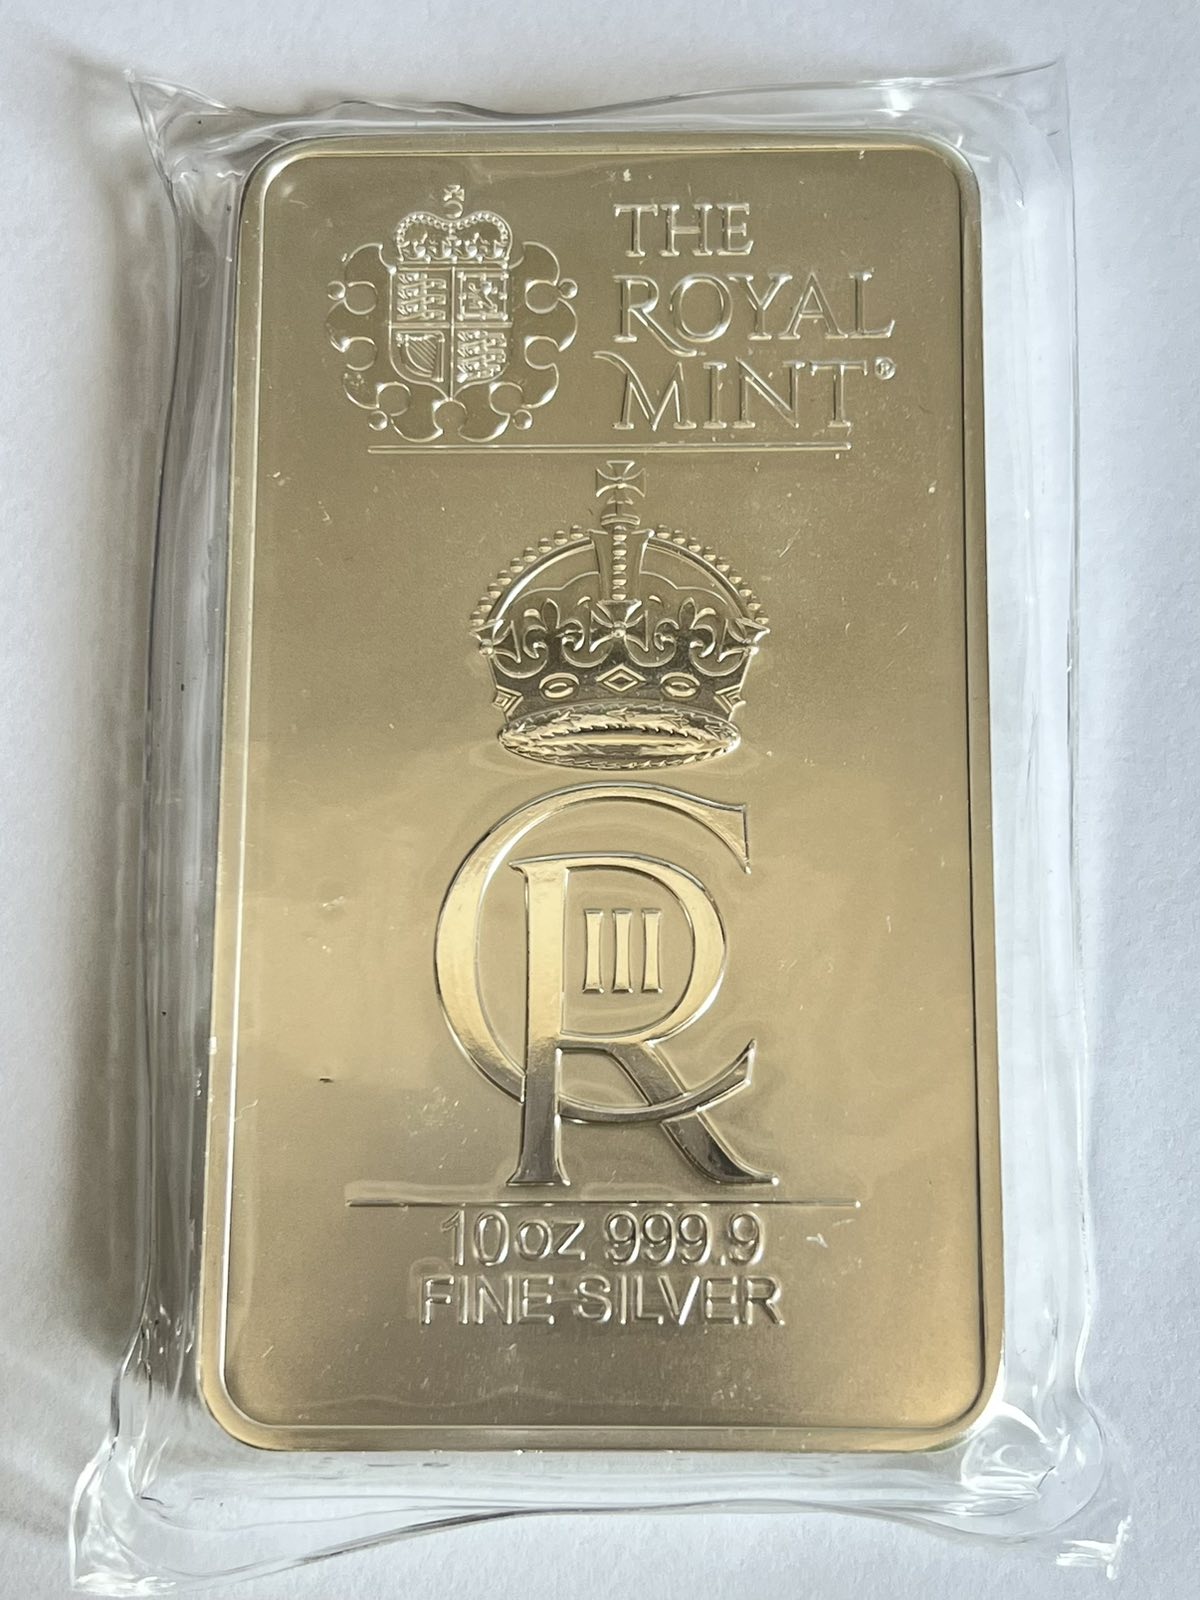 10 oz Silver Bar - The Royal Mint Celebration Bar in Mint-Sealed Packaging